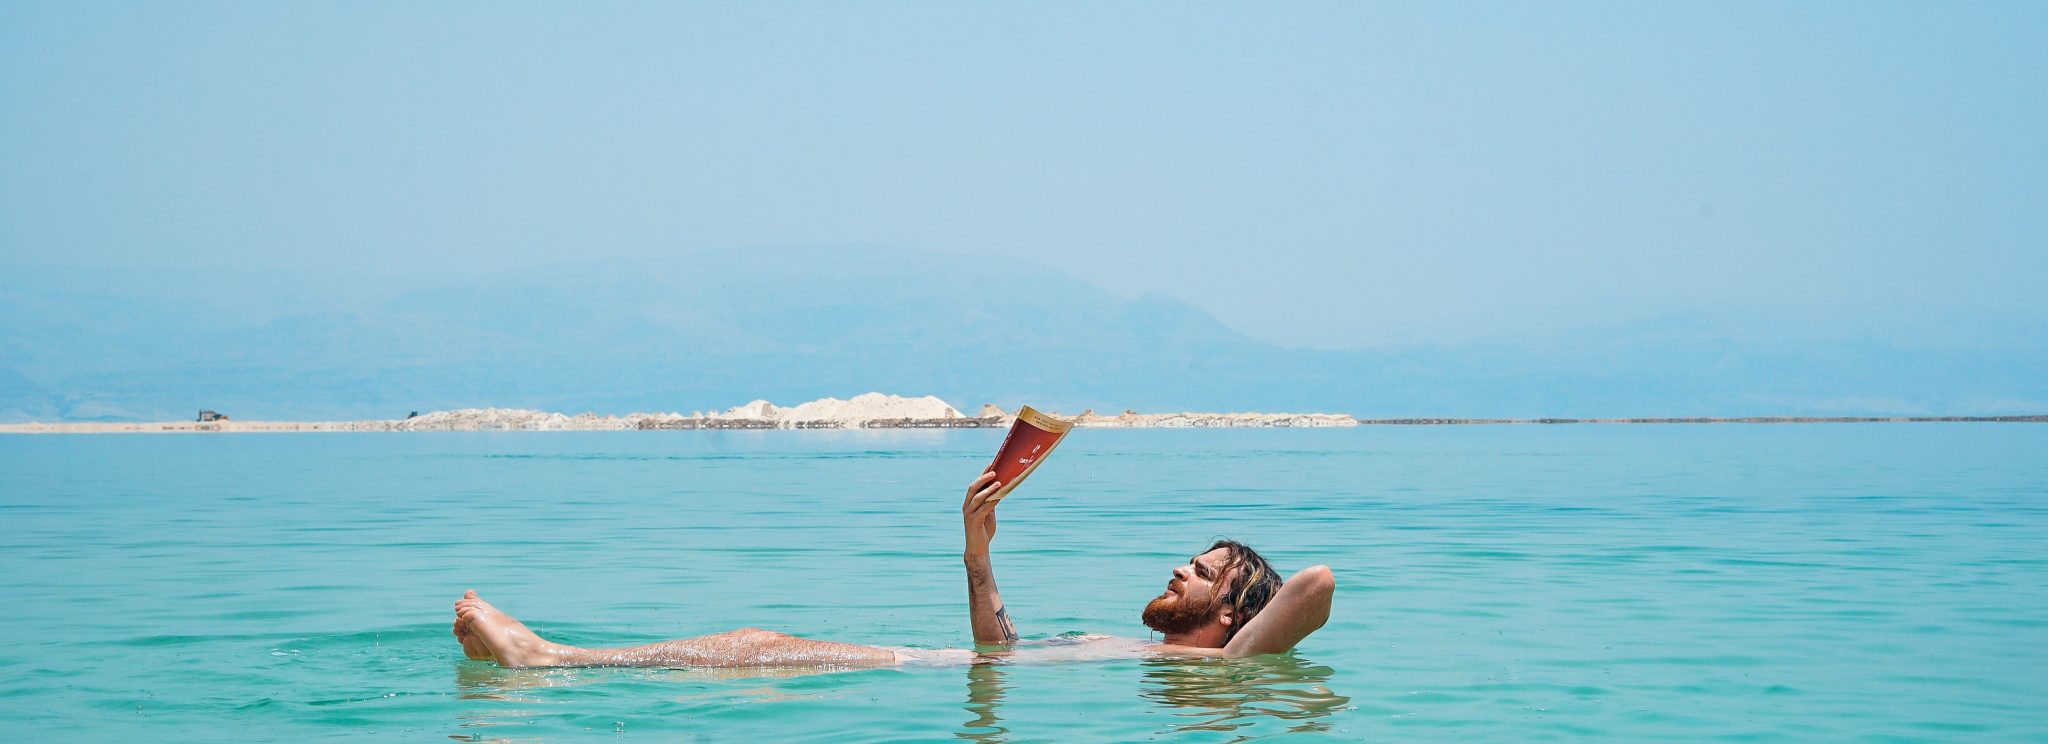 10 Interesting Facts About the Dead Sea